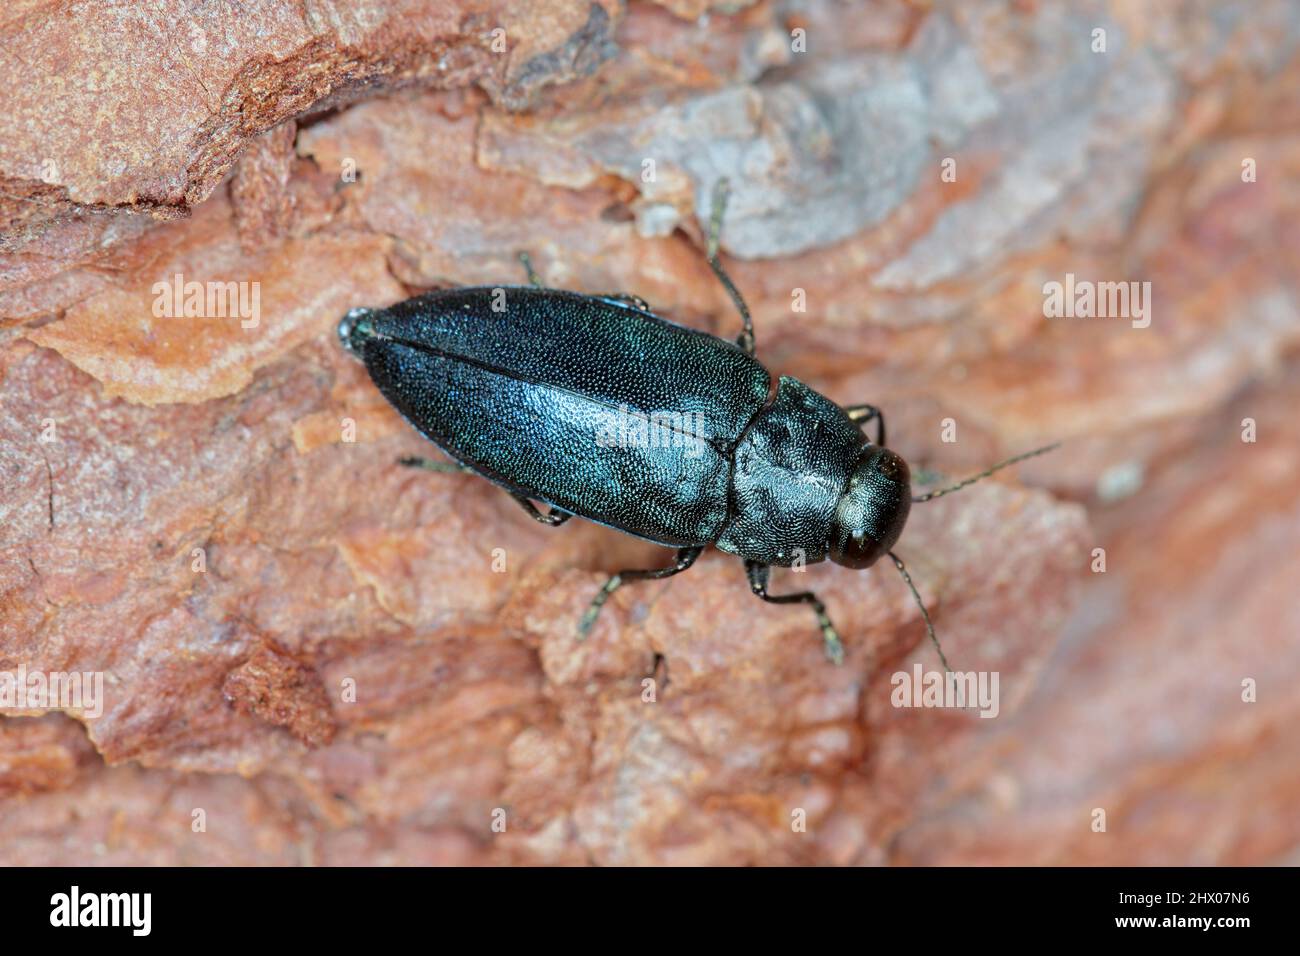 Steelblue jewel beetle Phaenops cyanea on pine bark. It is a pest of pines from the family Buprestidae known as jewel beetles or metallic wood-boring Stock Photo